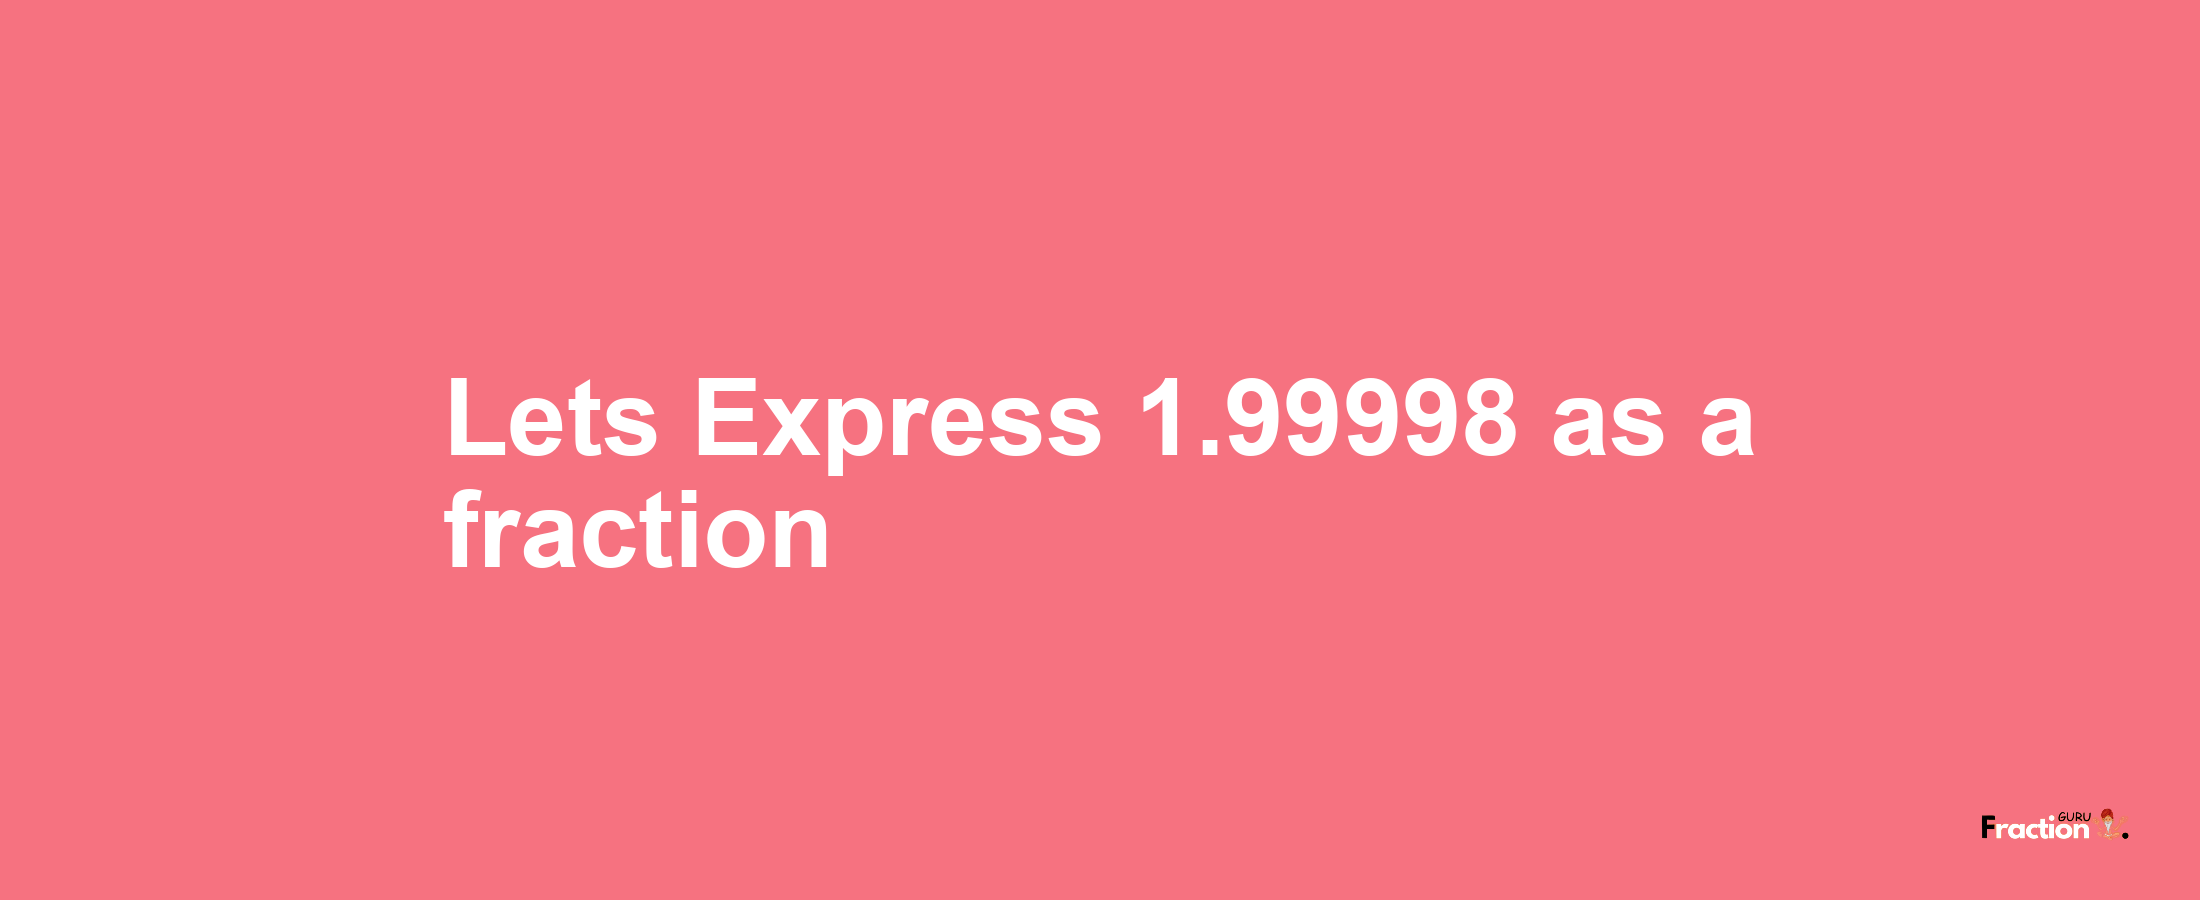 Lets Express 1.99998 as afraction